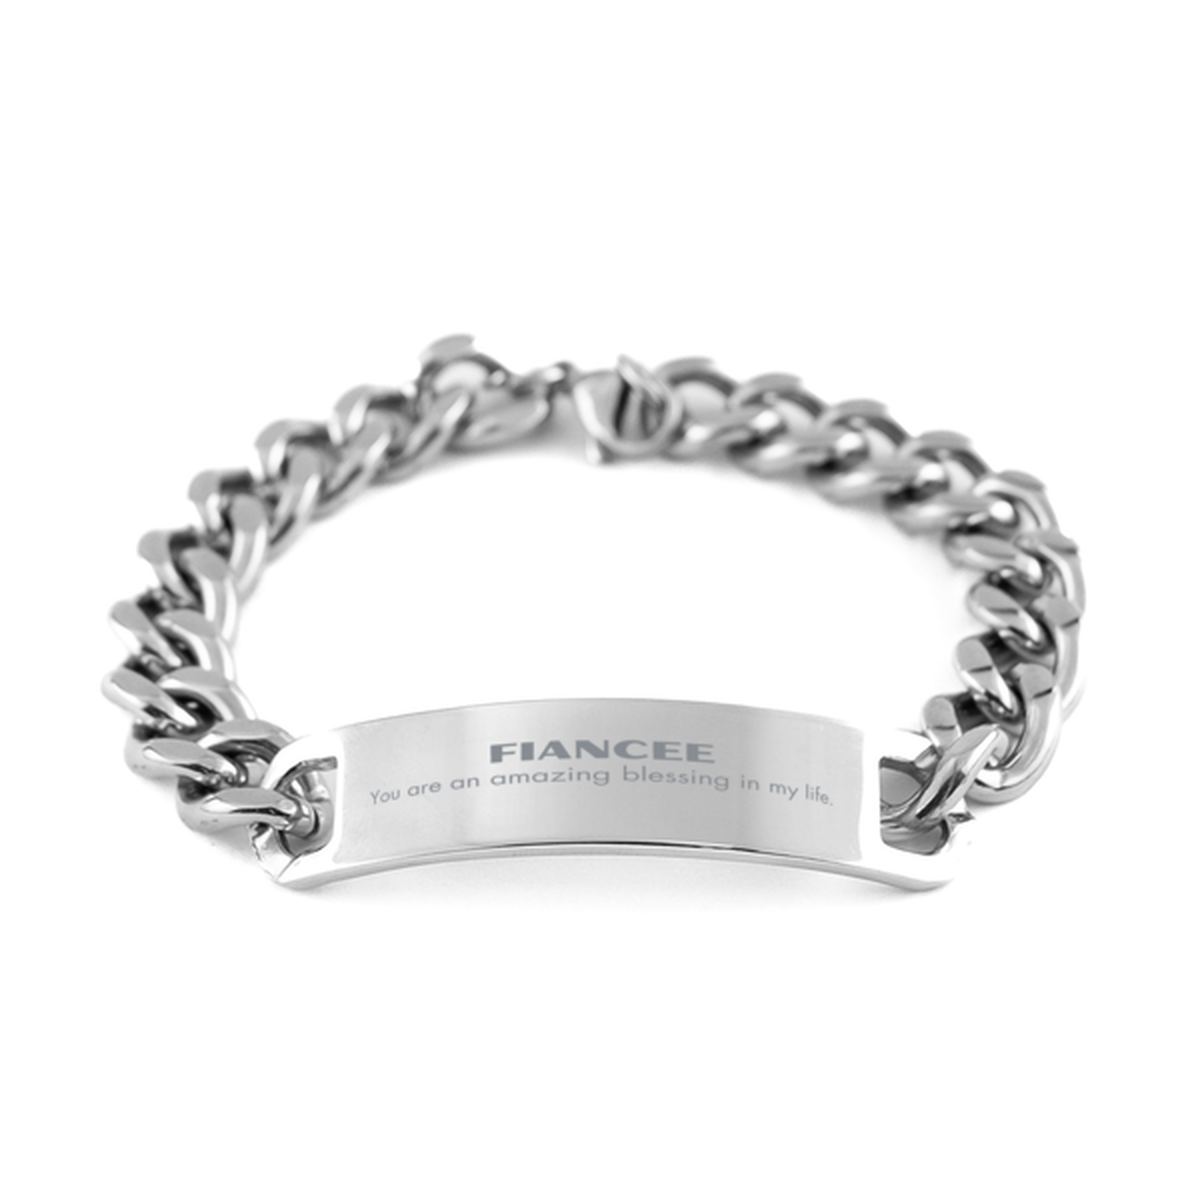 Fiancee Cuban Chain Stainless Steel Bracelet, You are an amazing blessing in my life, Thank You Gifts For Fiancee, Inspirational Birthday Christmas Unique Gifts For Fiancee